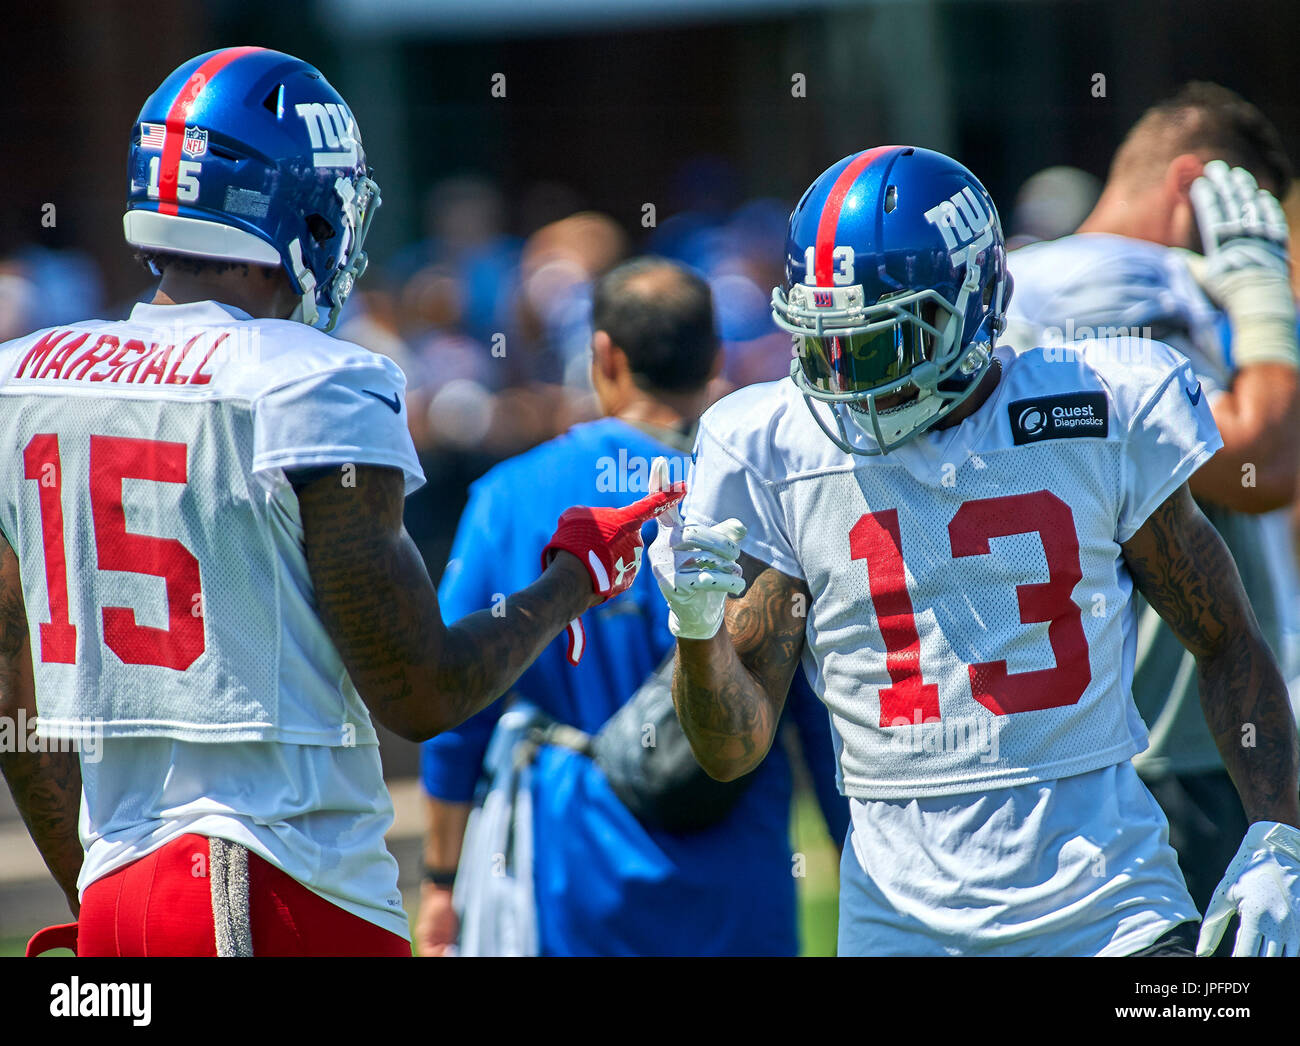 August 1, 2017 - East Rutherford, New Jersey, U.S. - New York Giants' wide  receivers Brandon Marshall (15) and Odell Beckham Jr (13) go through a hand  shake during practice at the